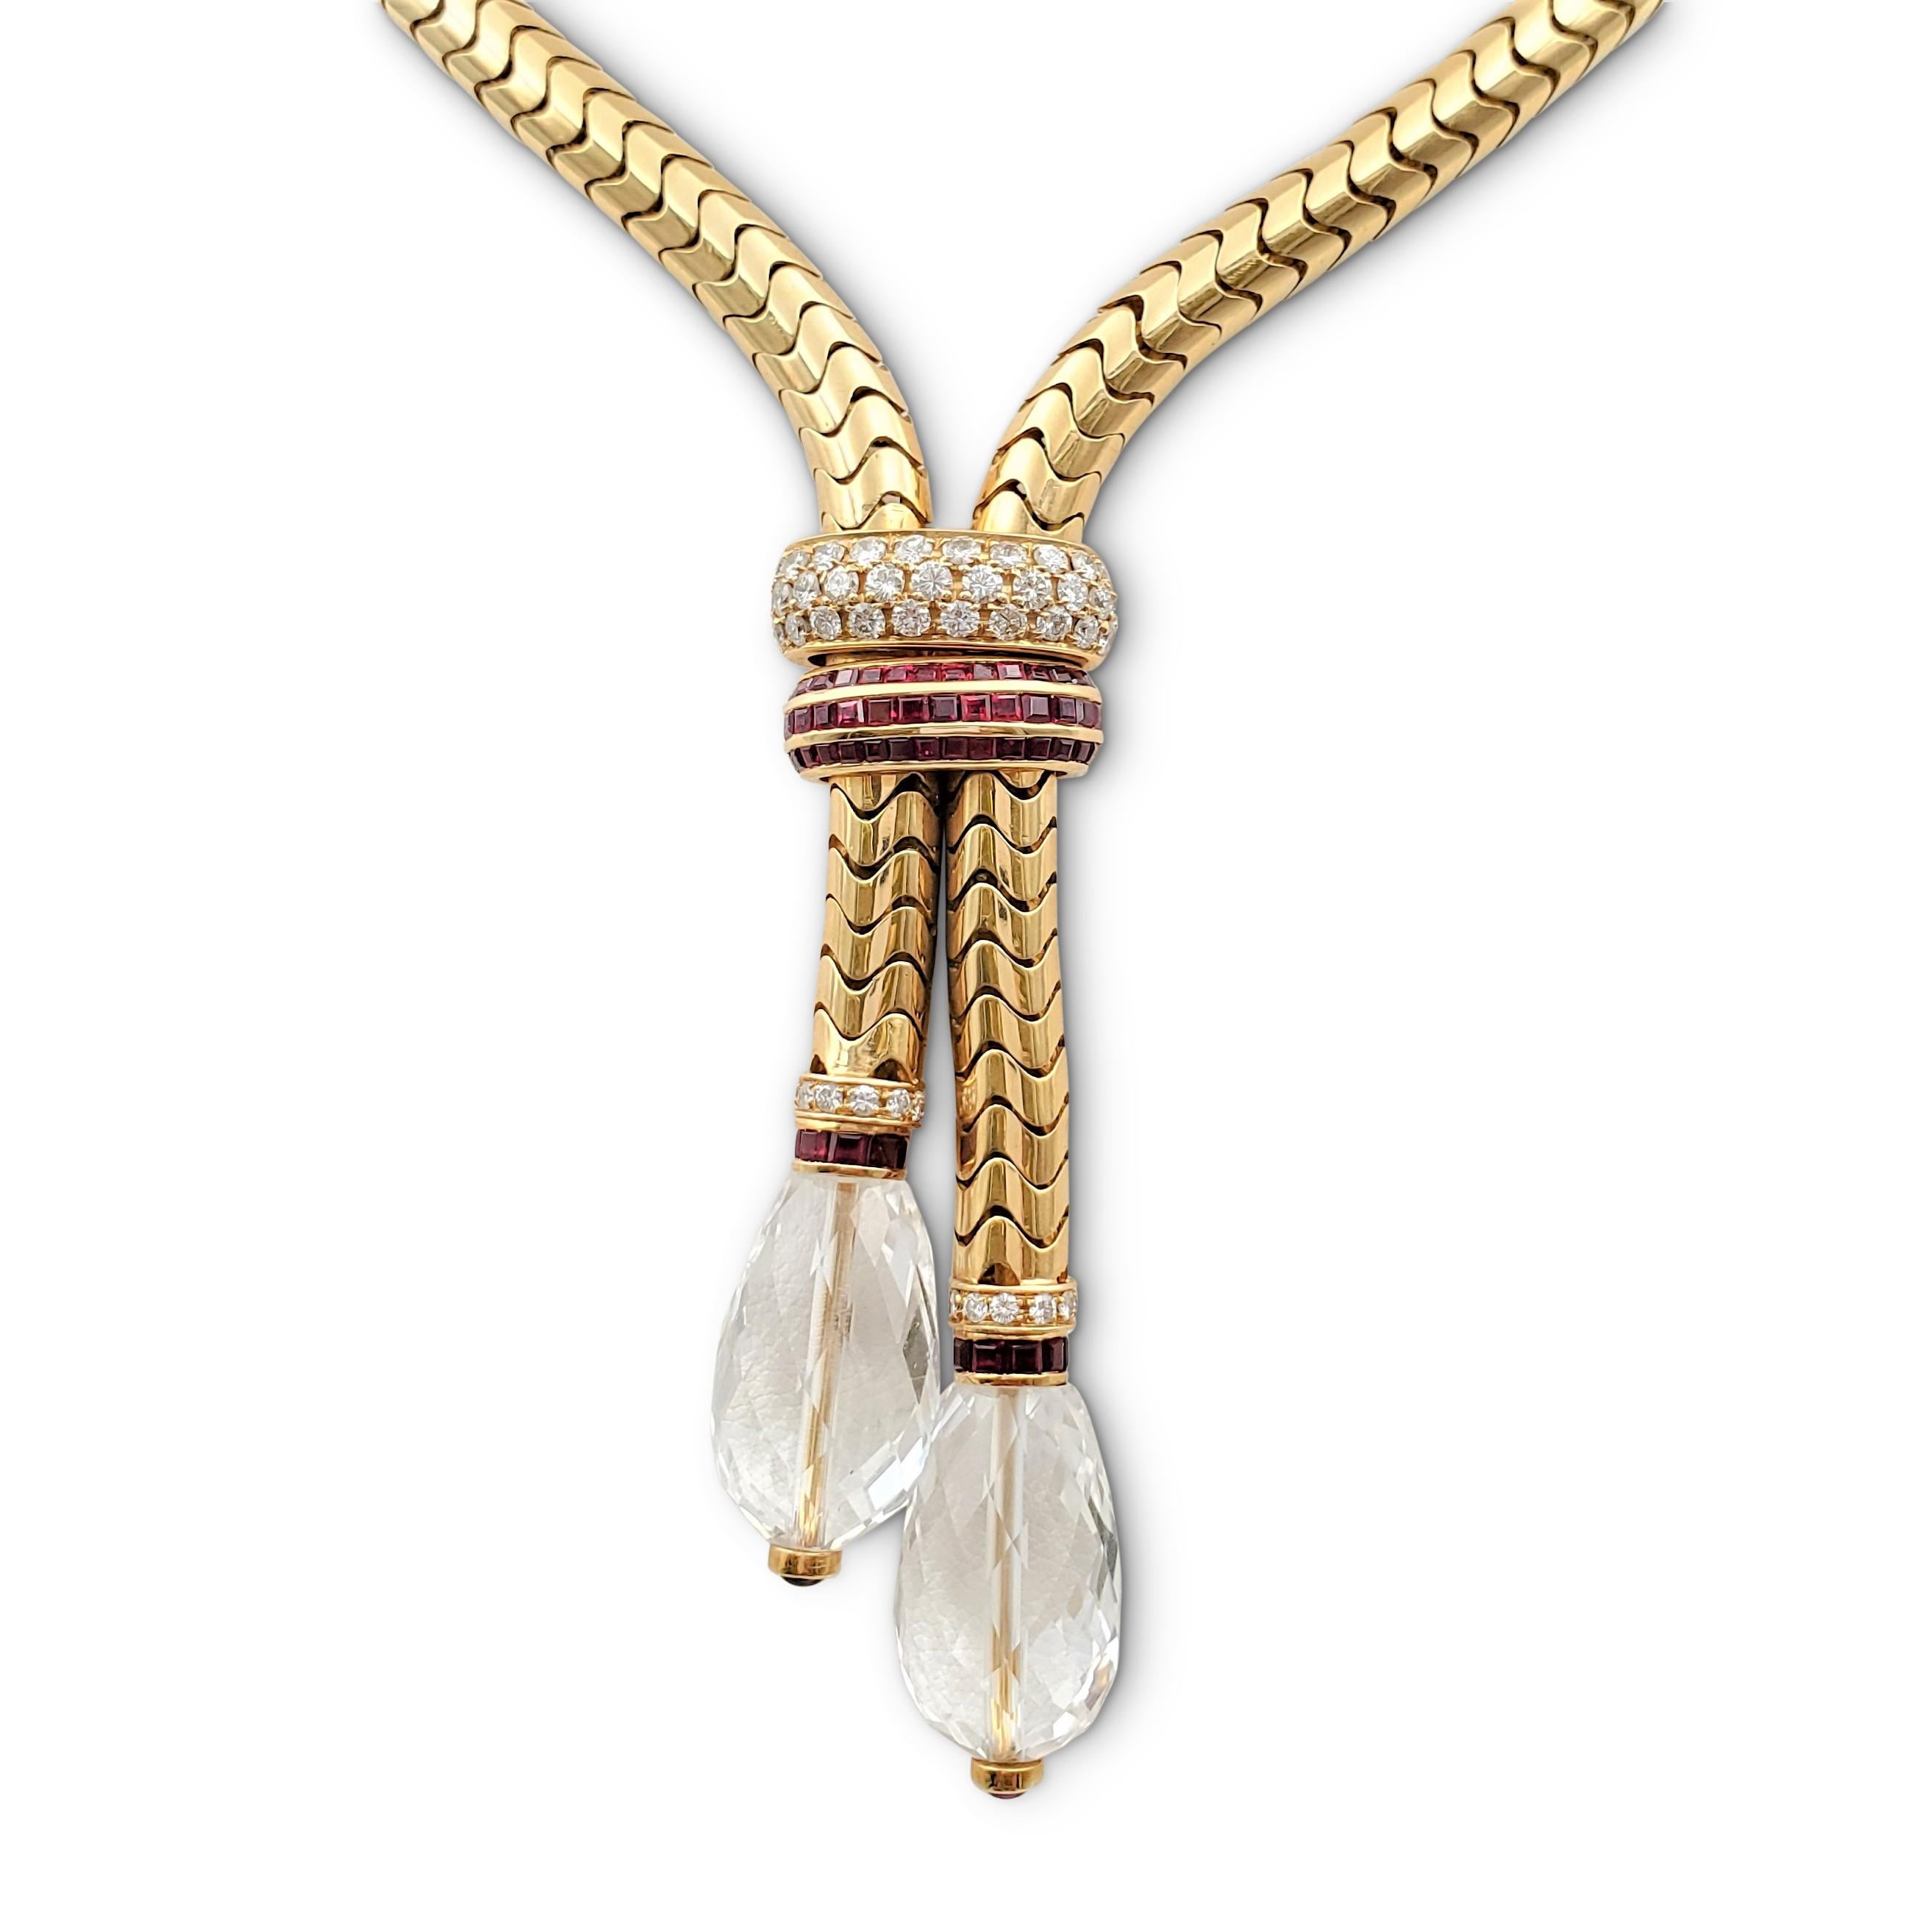 An enchanting necklace illustrating a lariat style crafted in 18 karat yellow gold. The substantial snake chain features a stationary enhancer set with one section of an estimated 0.95 carats of round brilliant cut diamonds and another set with an